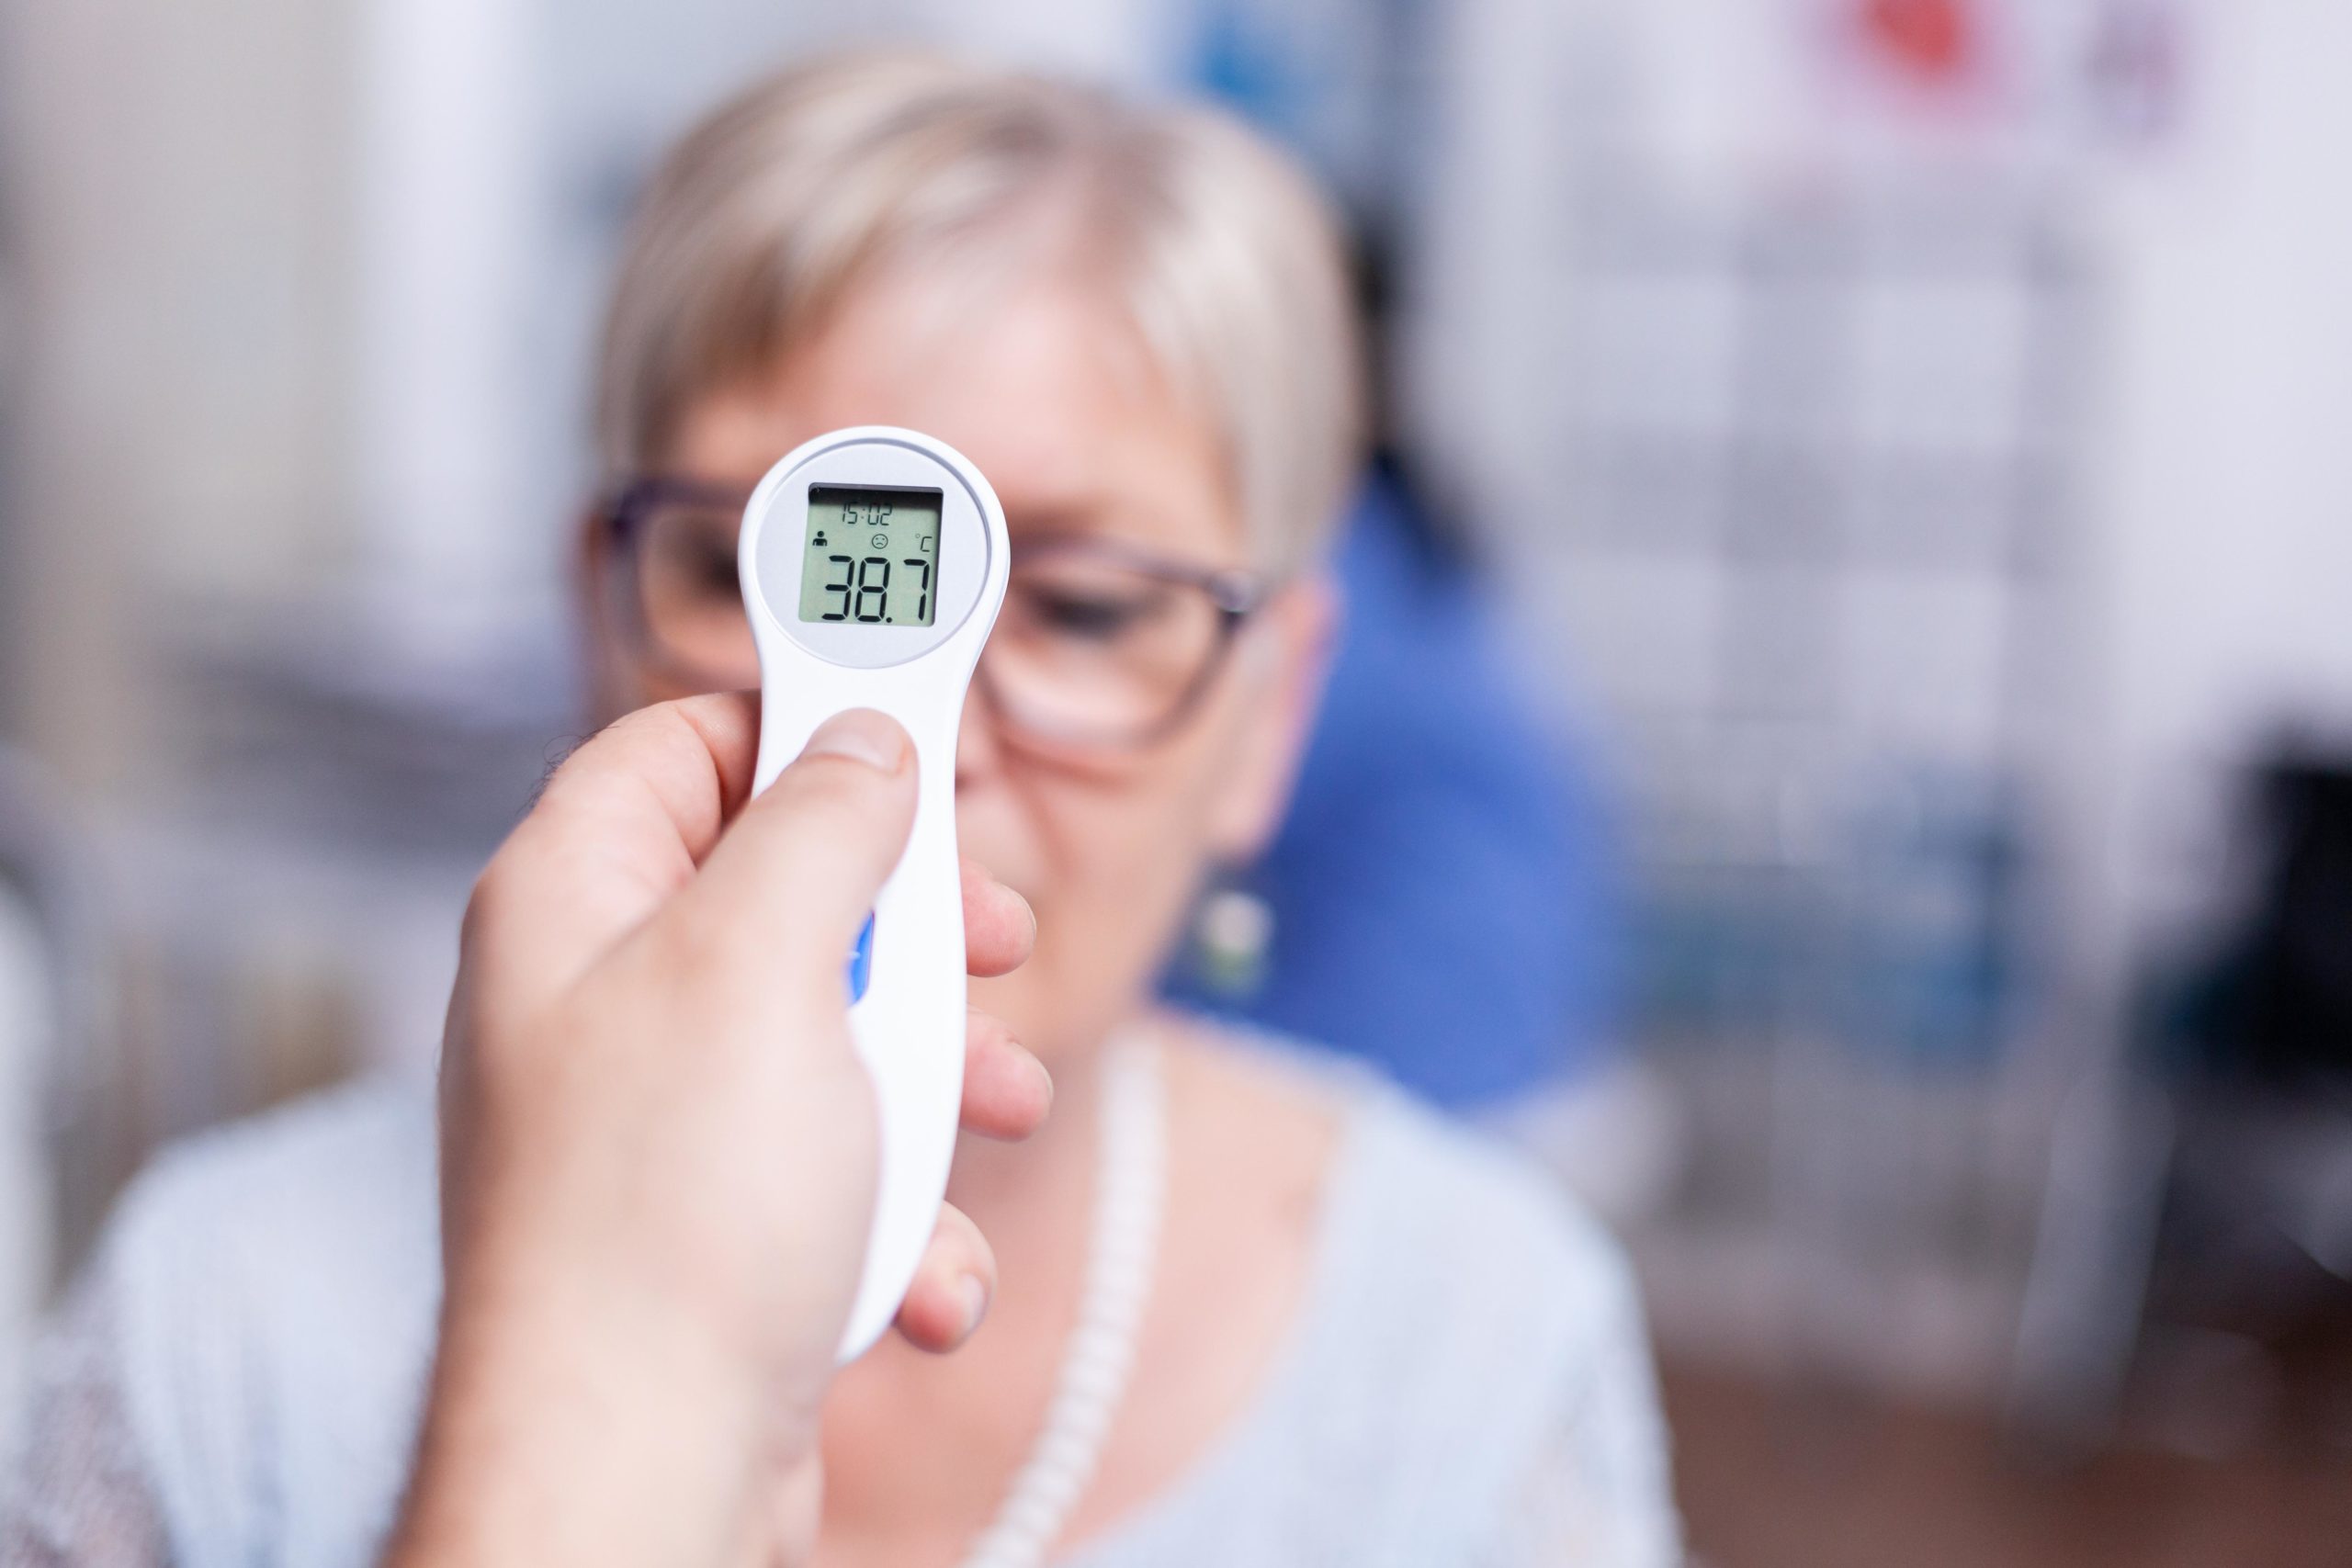 Expert Tips On Using A Thermometer Correctly For Accurate Results